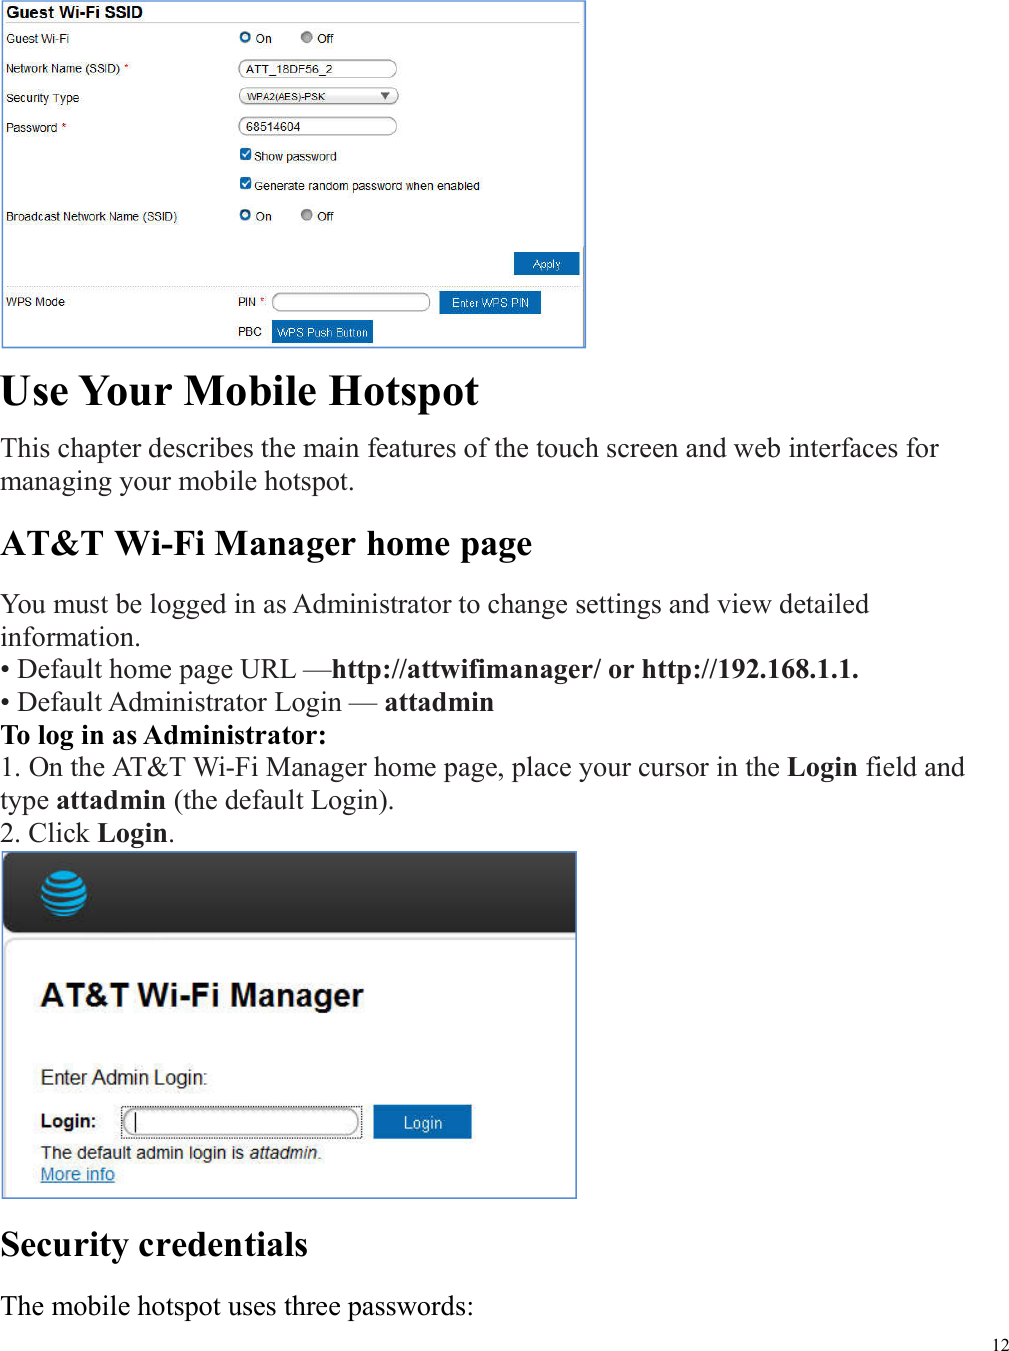 12   Use Your Mobile Hotspot This chapter describes the main features of the touch screen and web interfaces for managing your mobile hotspot. AT&amp;T Wi-Fi Manager home page You must be logged in as Administrator to change settings and view detailed information.   • Default home page URL —http://attwifimanager/ or http://192.168.1.1. • Default Administrator Login — attadmin   To log in as Administrator: 1. On the AT&amp;T Wi-Fi Manager home page, place your cursor in the Login field and type attadmin (the default Login). 2. Click Login.    Security credentials The mobile hotspot uses three passwords: 